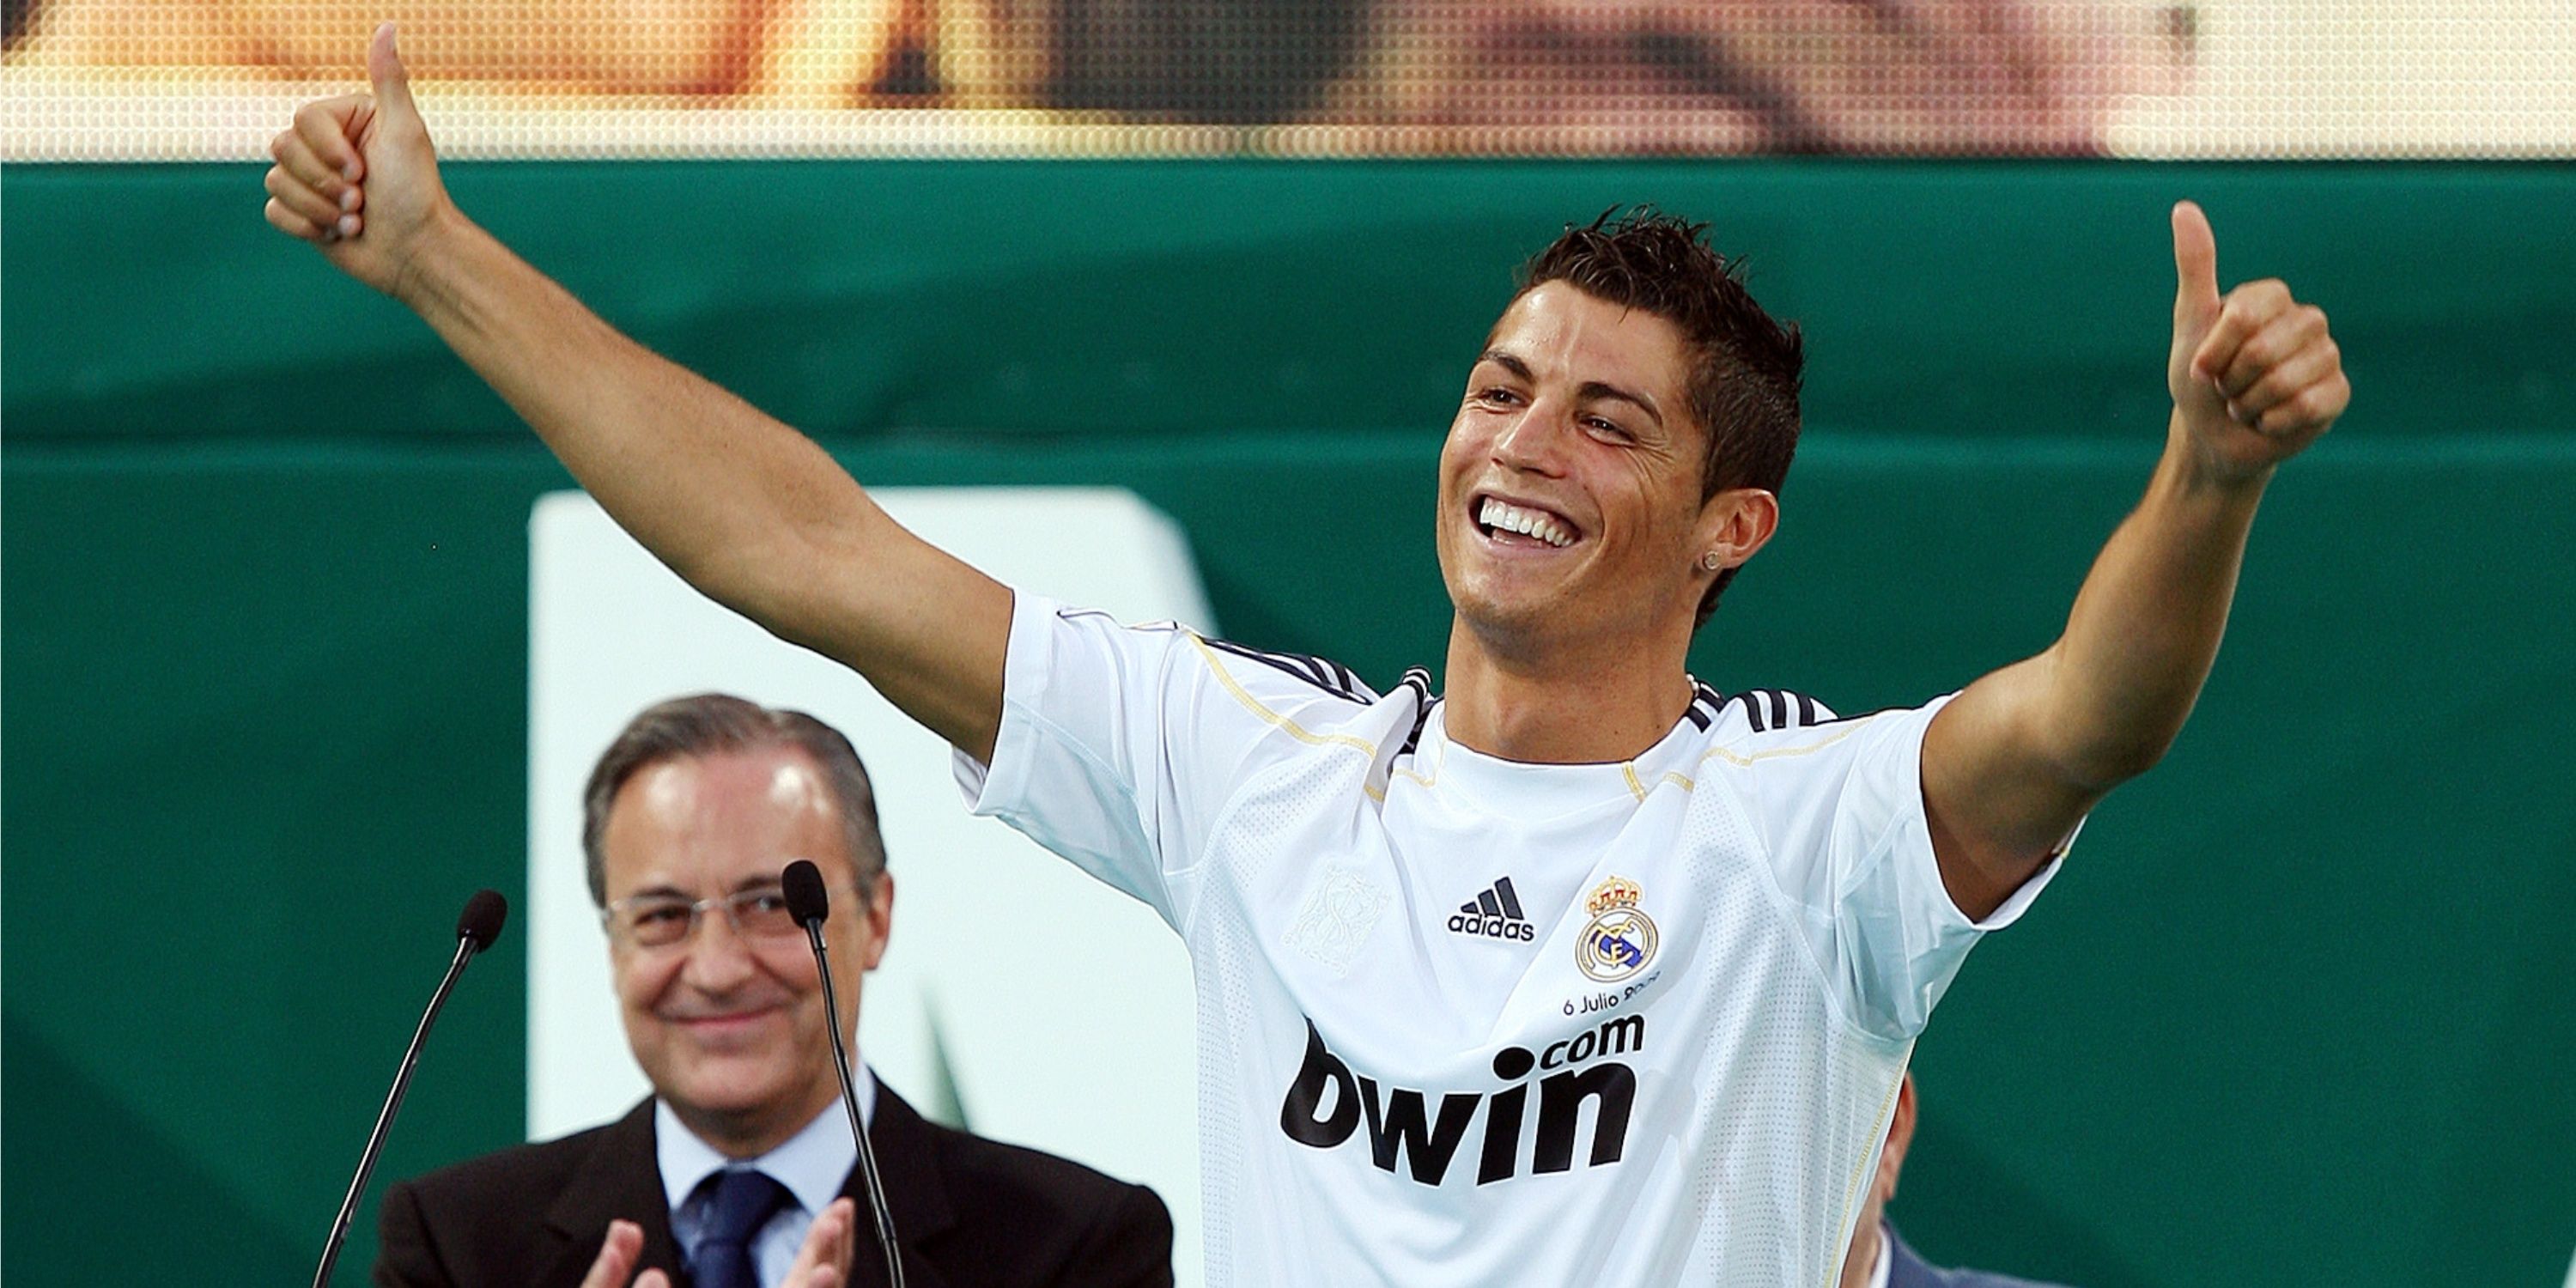 Cristiano Ronaldo gives a thumbs up to his new supporters after being unveilled as a Real Madrid player.